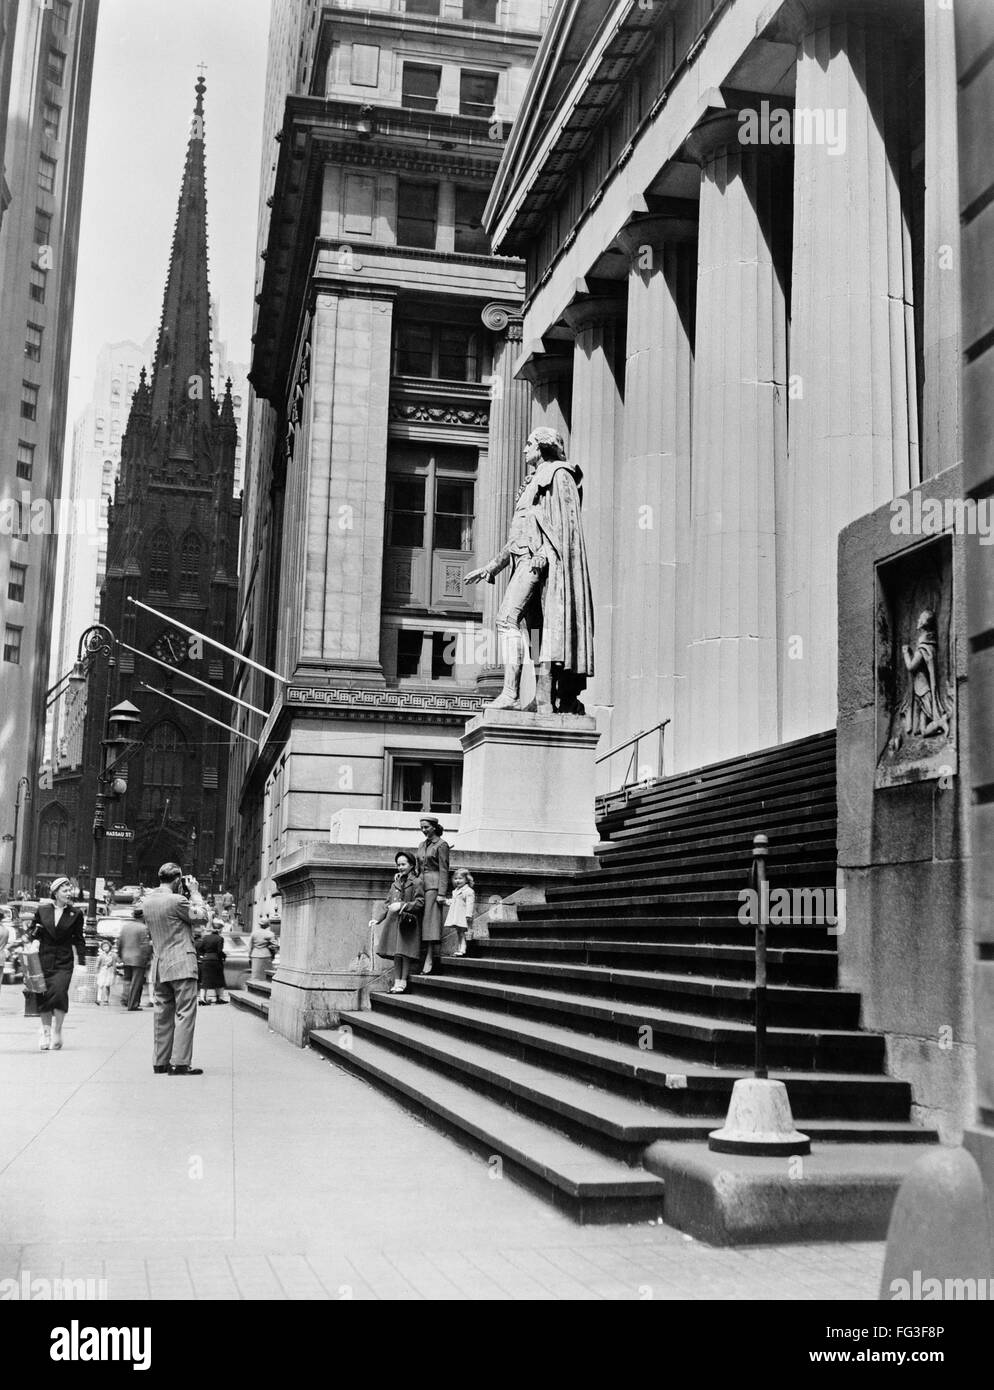 NEW YORK: FEDERAL HALL. /nFederal Hall at 26 Wall Street in New York City, built in 1842. Photograph, 1937. Stock Photo